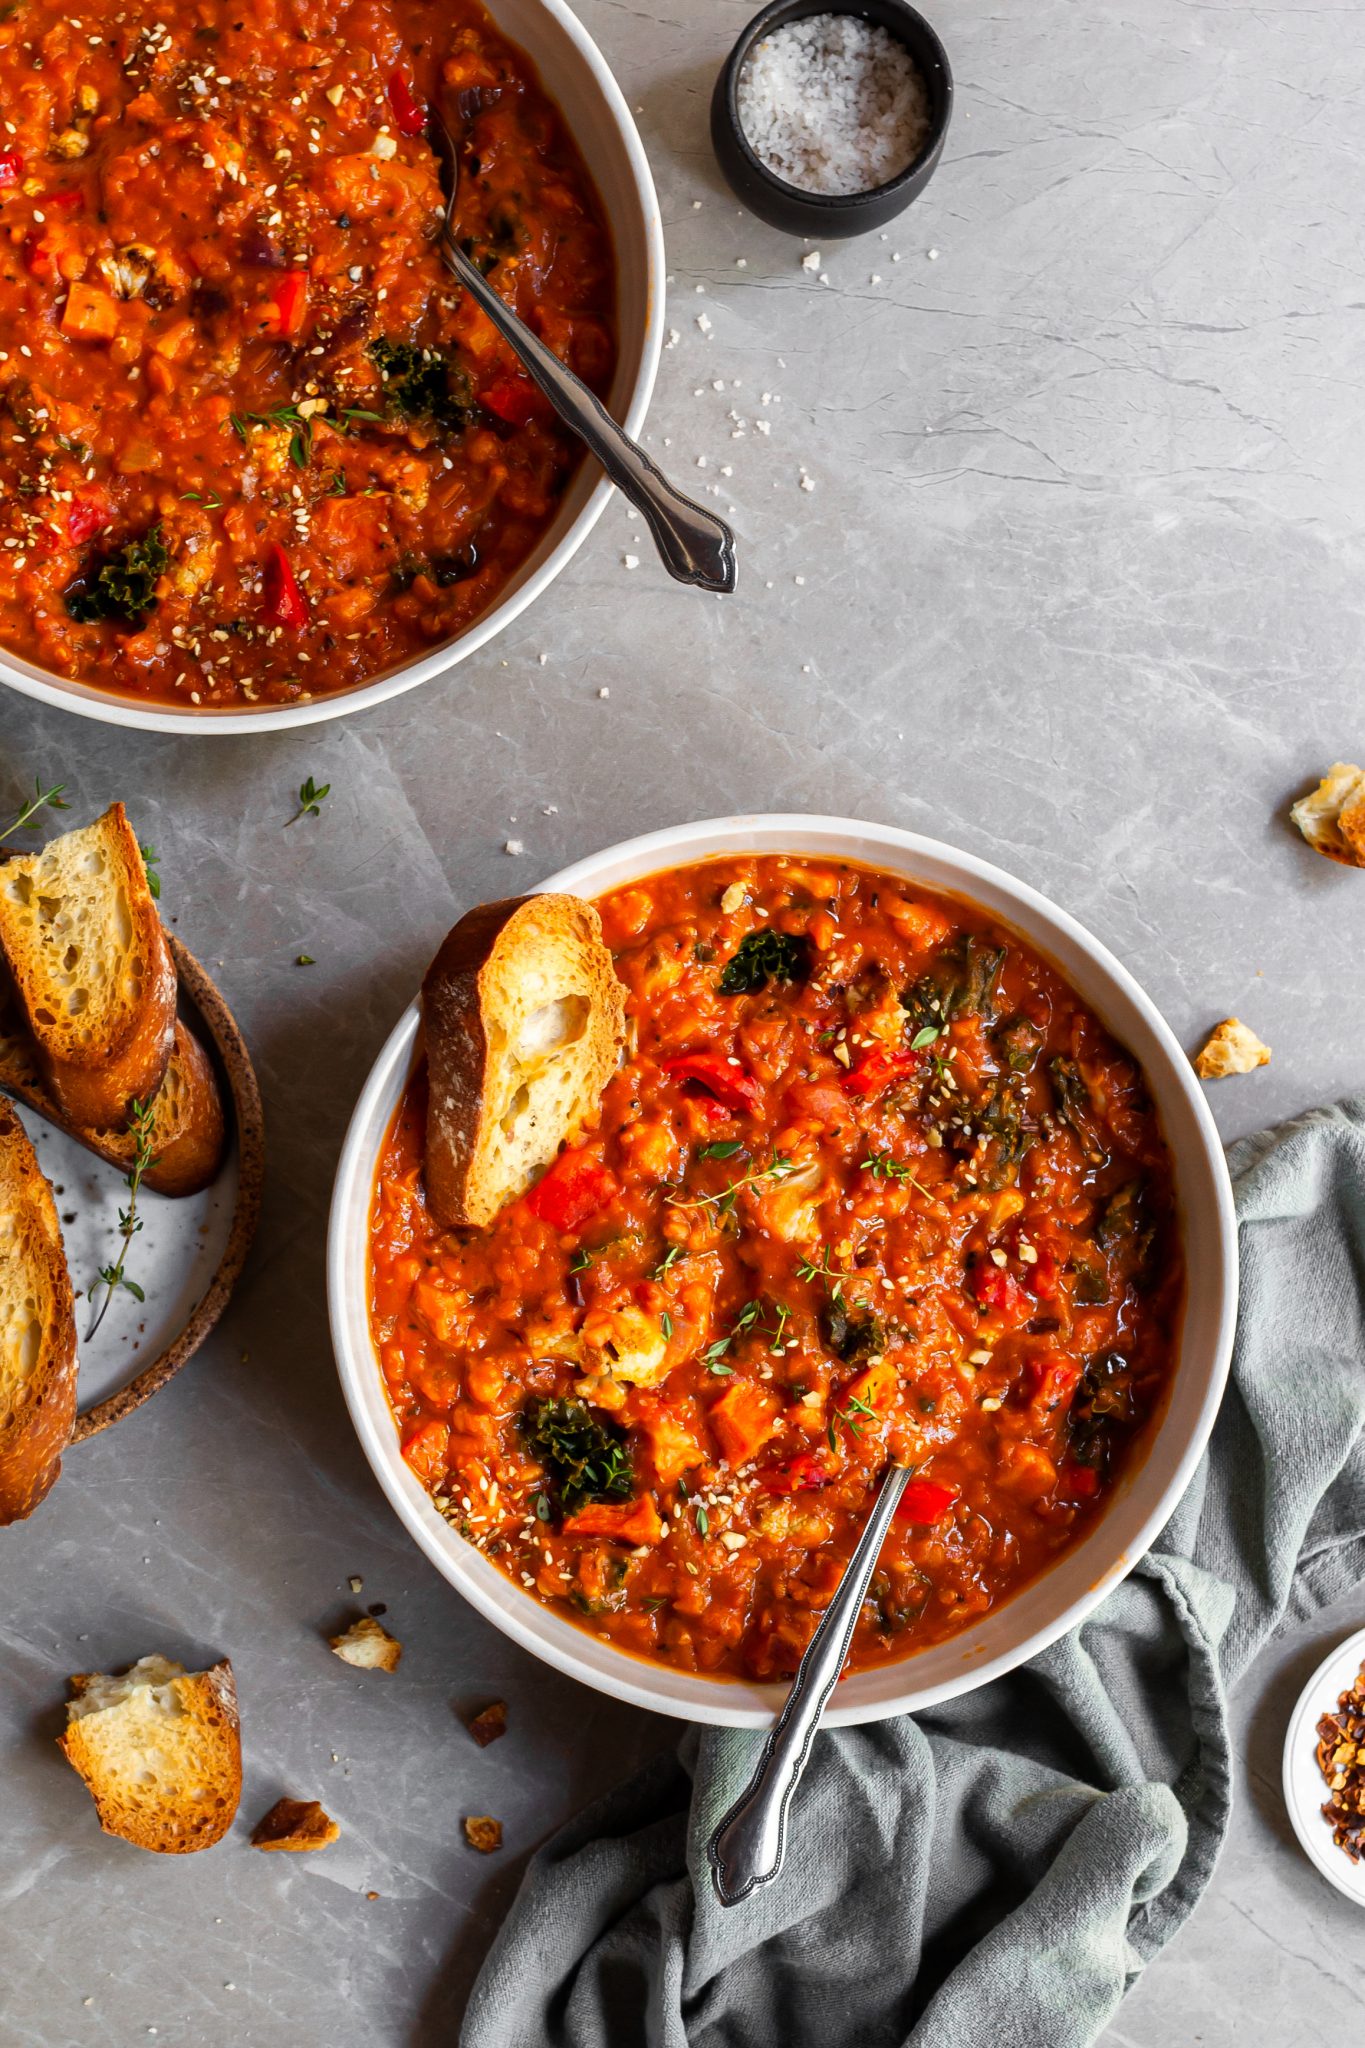 Roasted Garlic Vegetable Stew with Red Lentils and Tomatoes